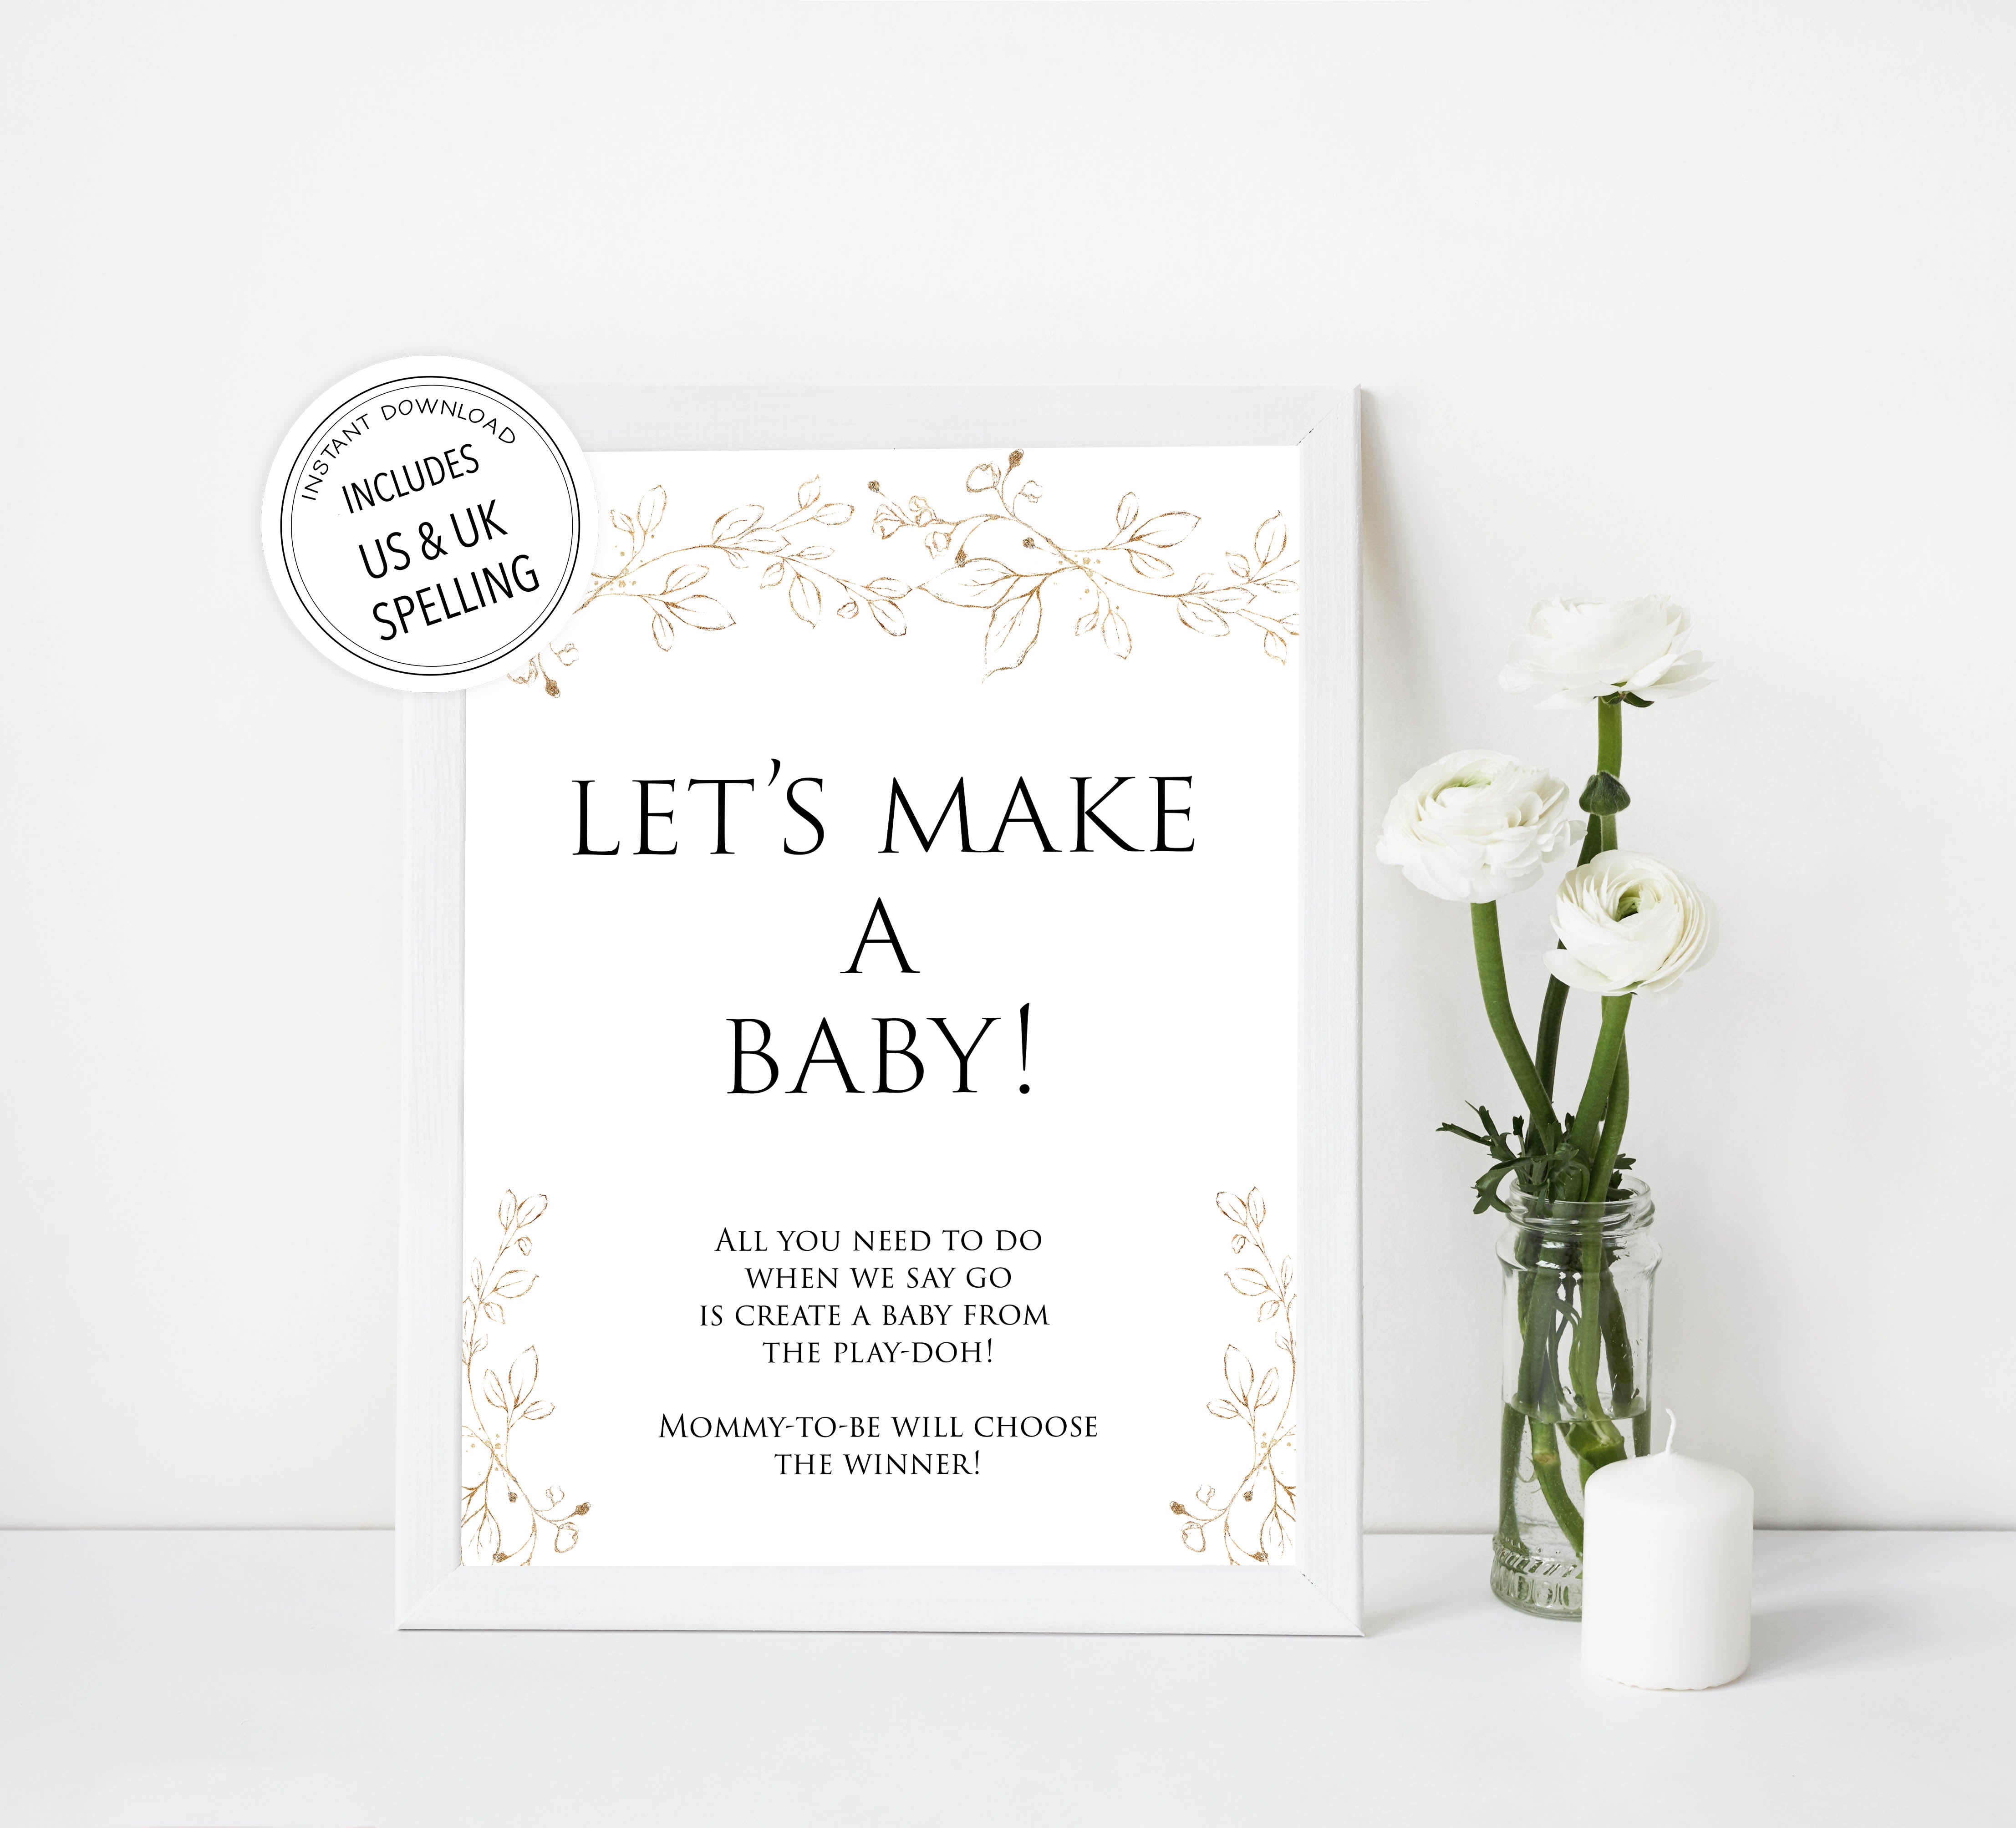 lets make a baby game, Printable baby shower games, gold leaf baby games, baby shower games, fun baby shower ideas, top baby shower ideas, gold leaf baby shower, baby shower games, fun gold leaf baby shower ideas